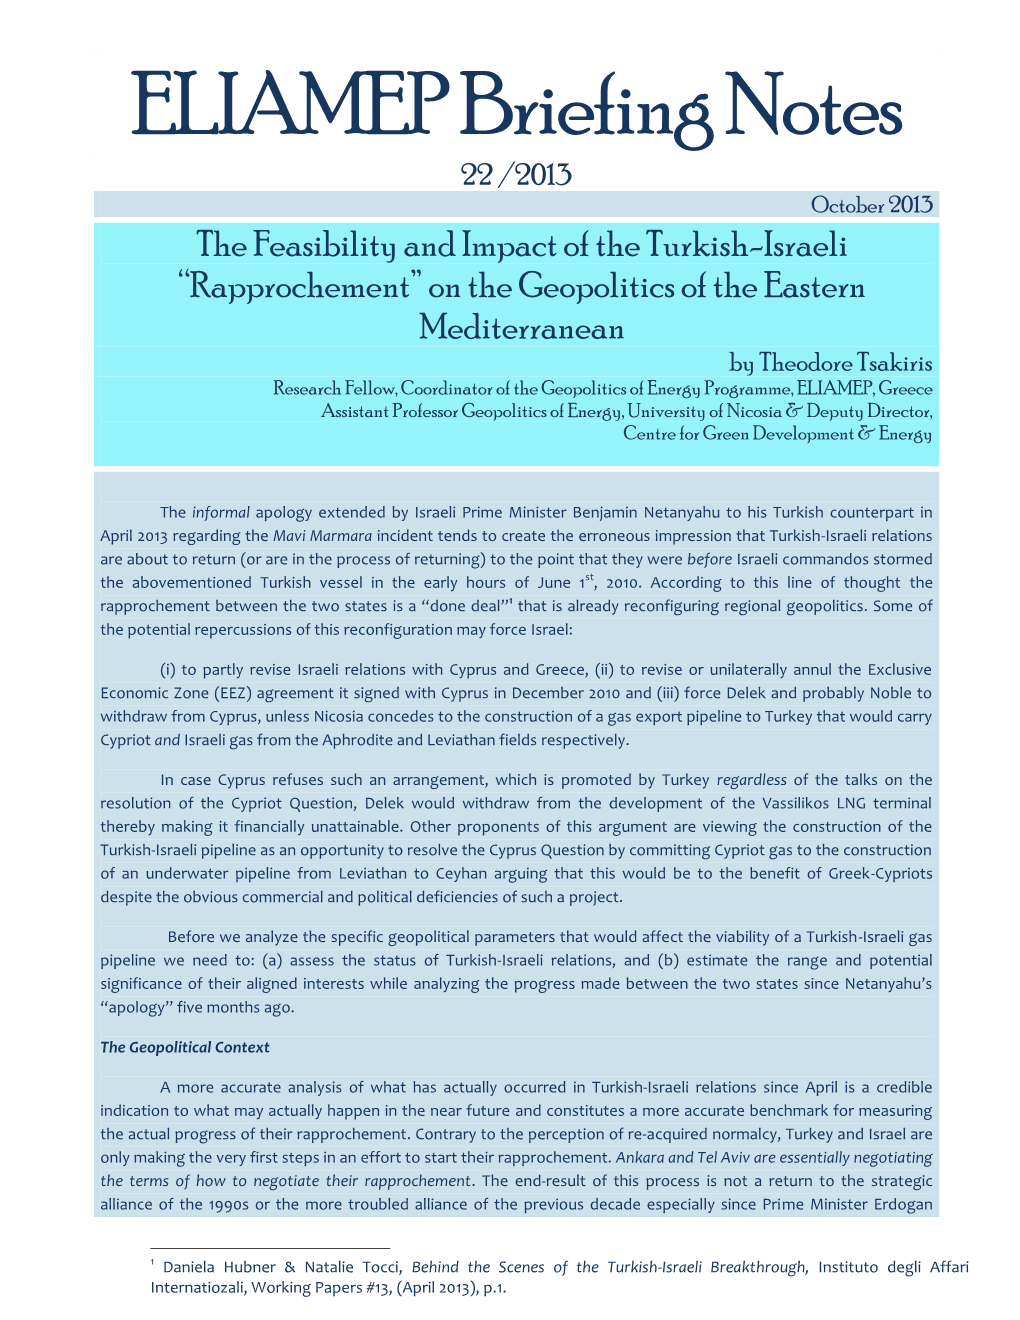 The Feasibility and Impact of the Turkish-Israeli "Rapprochement" On